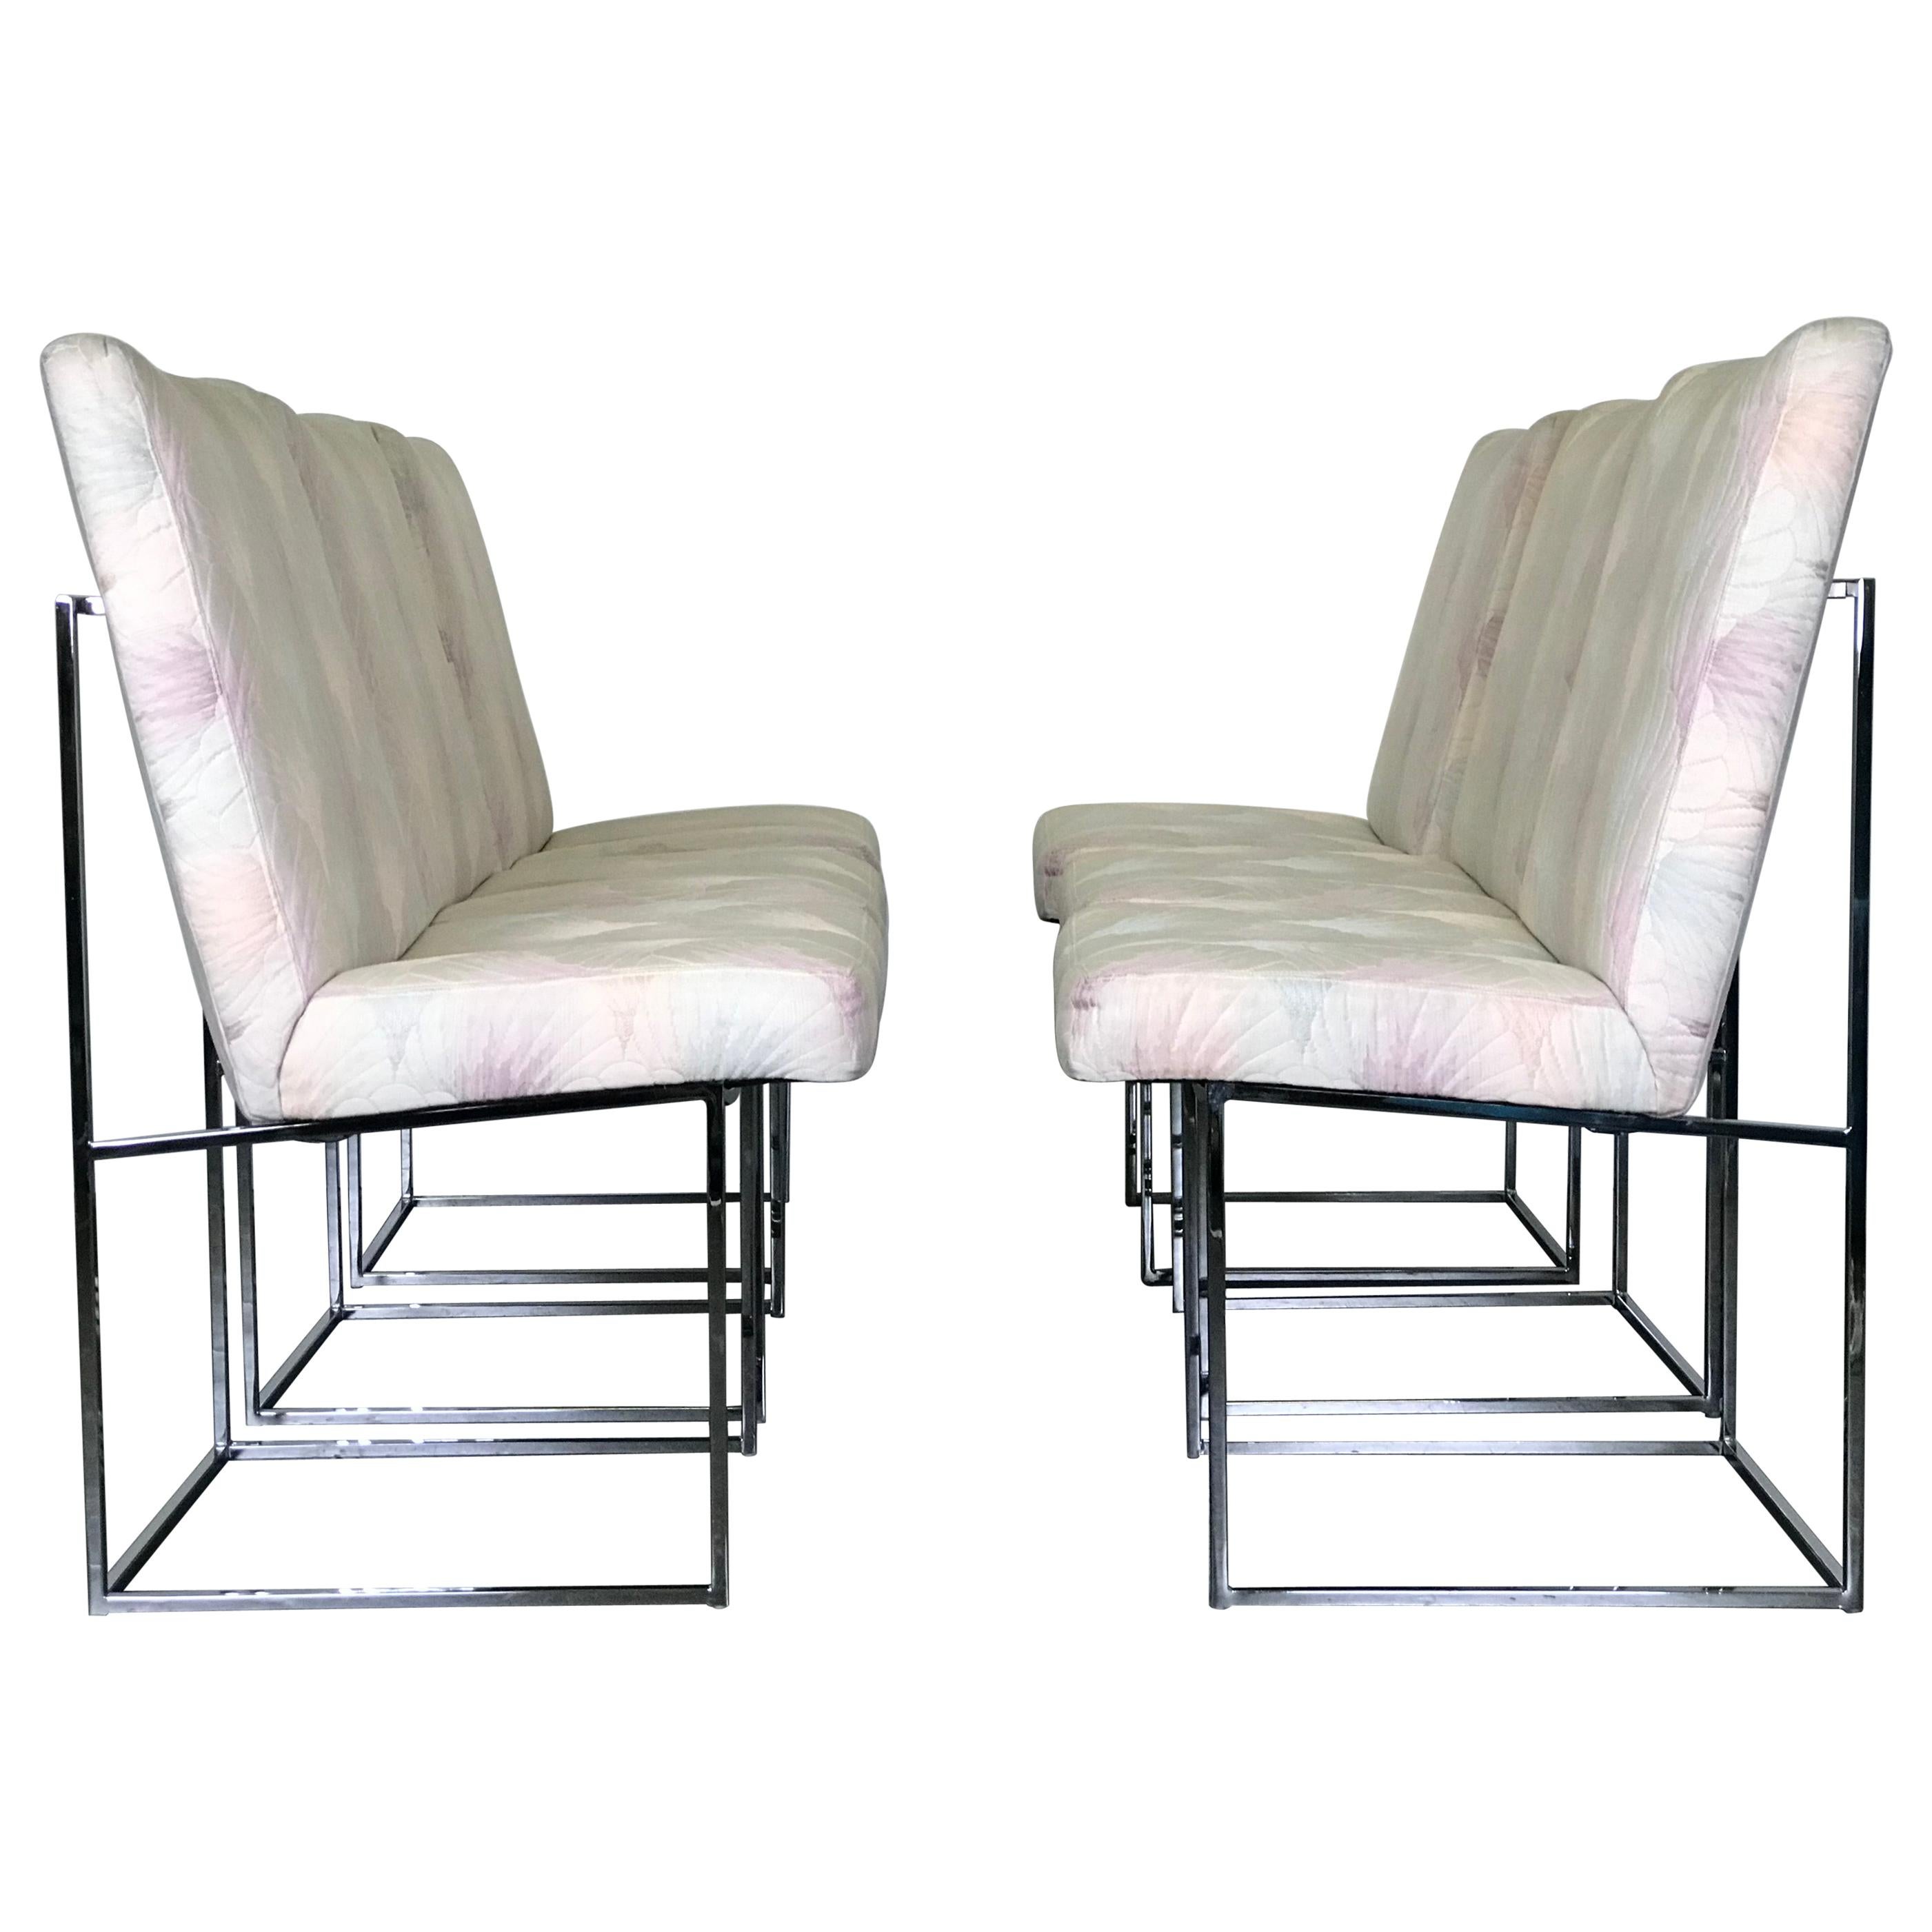 Six Mid Century Modern Milo Baughman Dining Chairs for Thayer Coggin in Chrome  